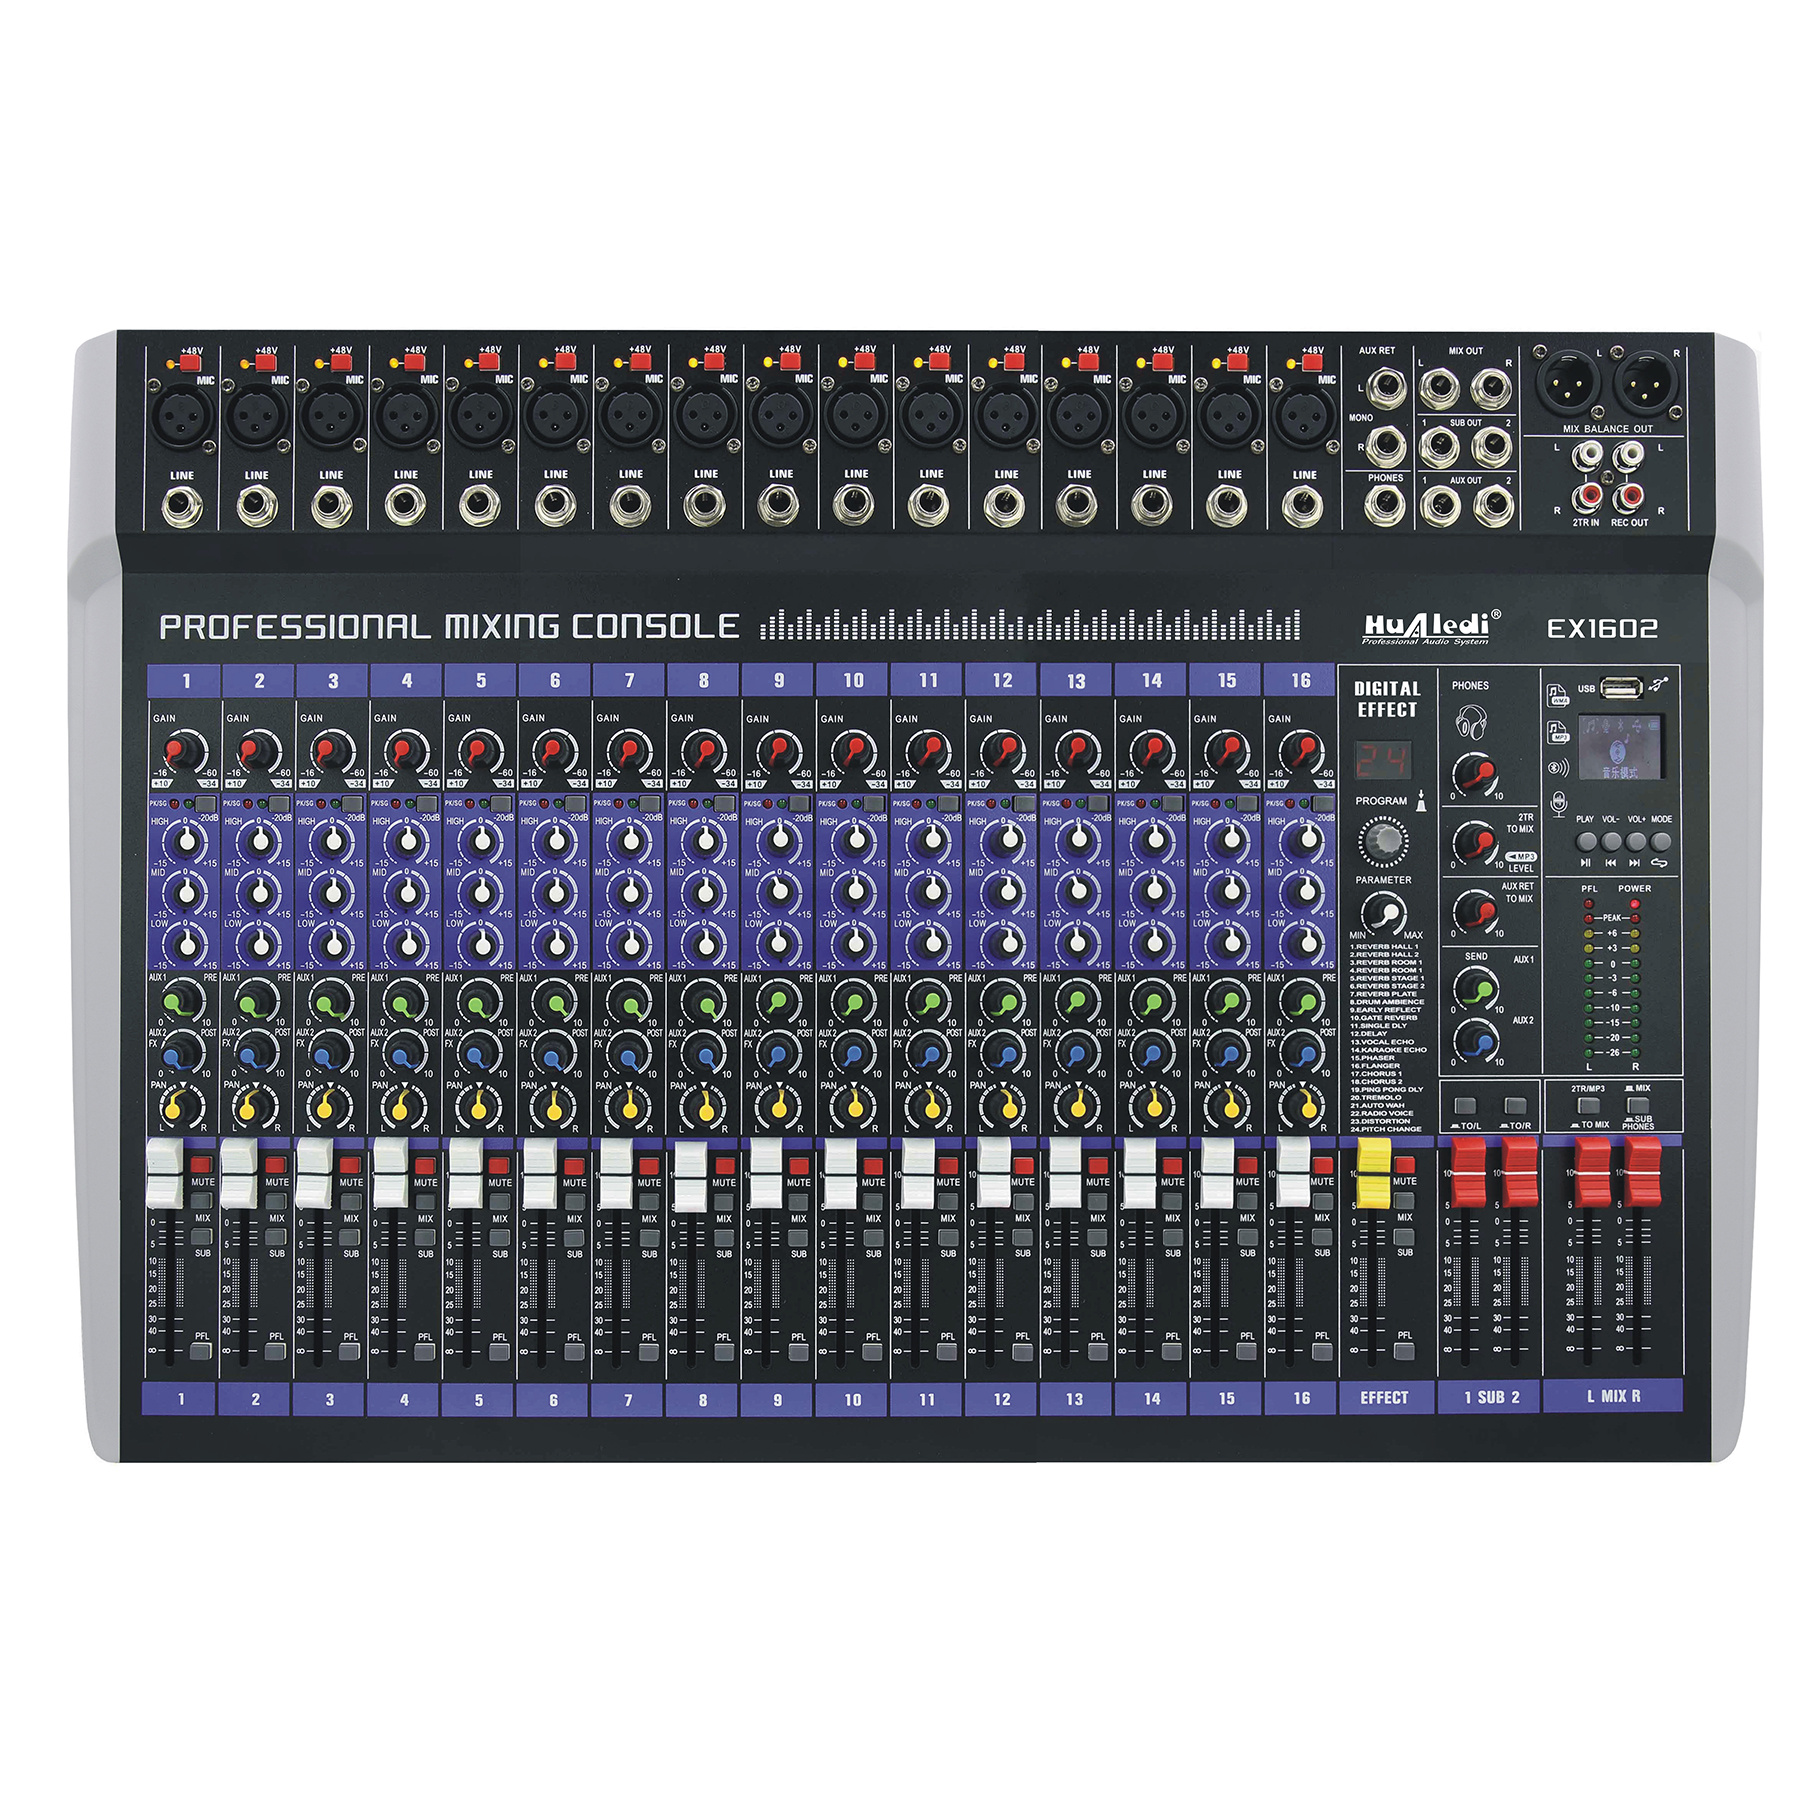 16 channels mixing console Strong anti-interference capability